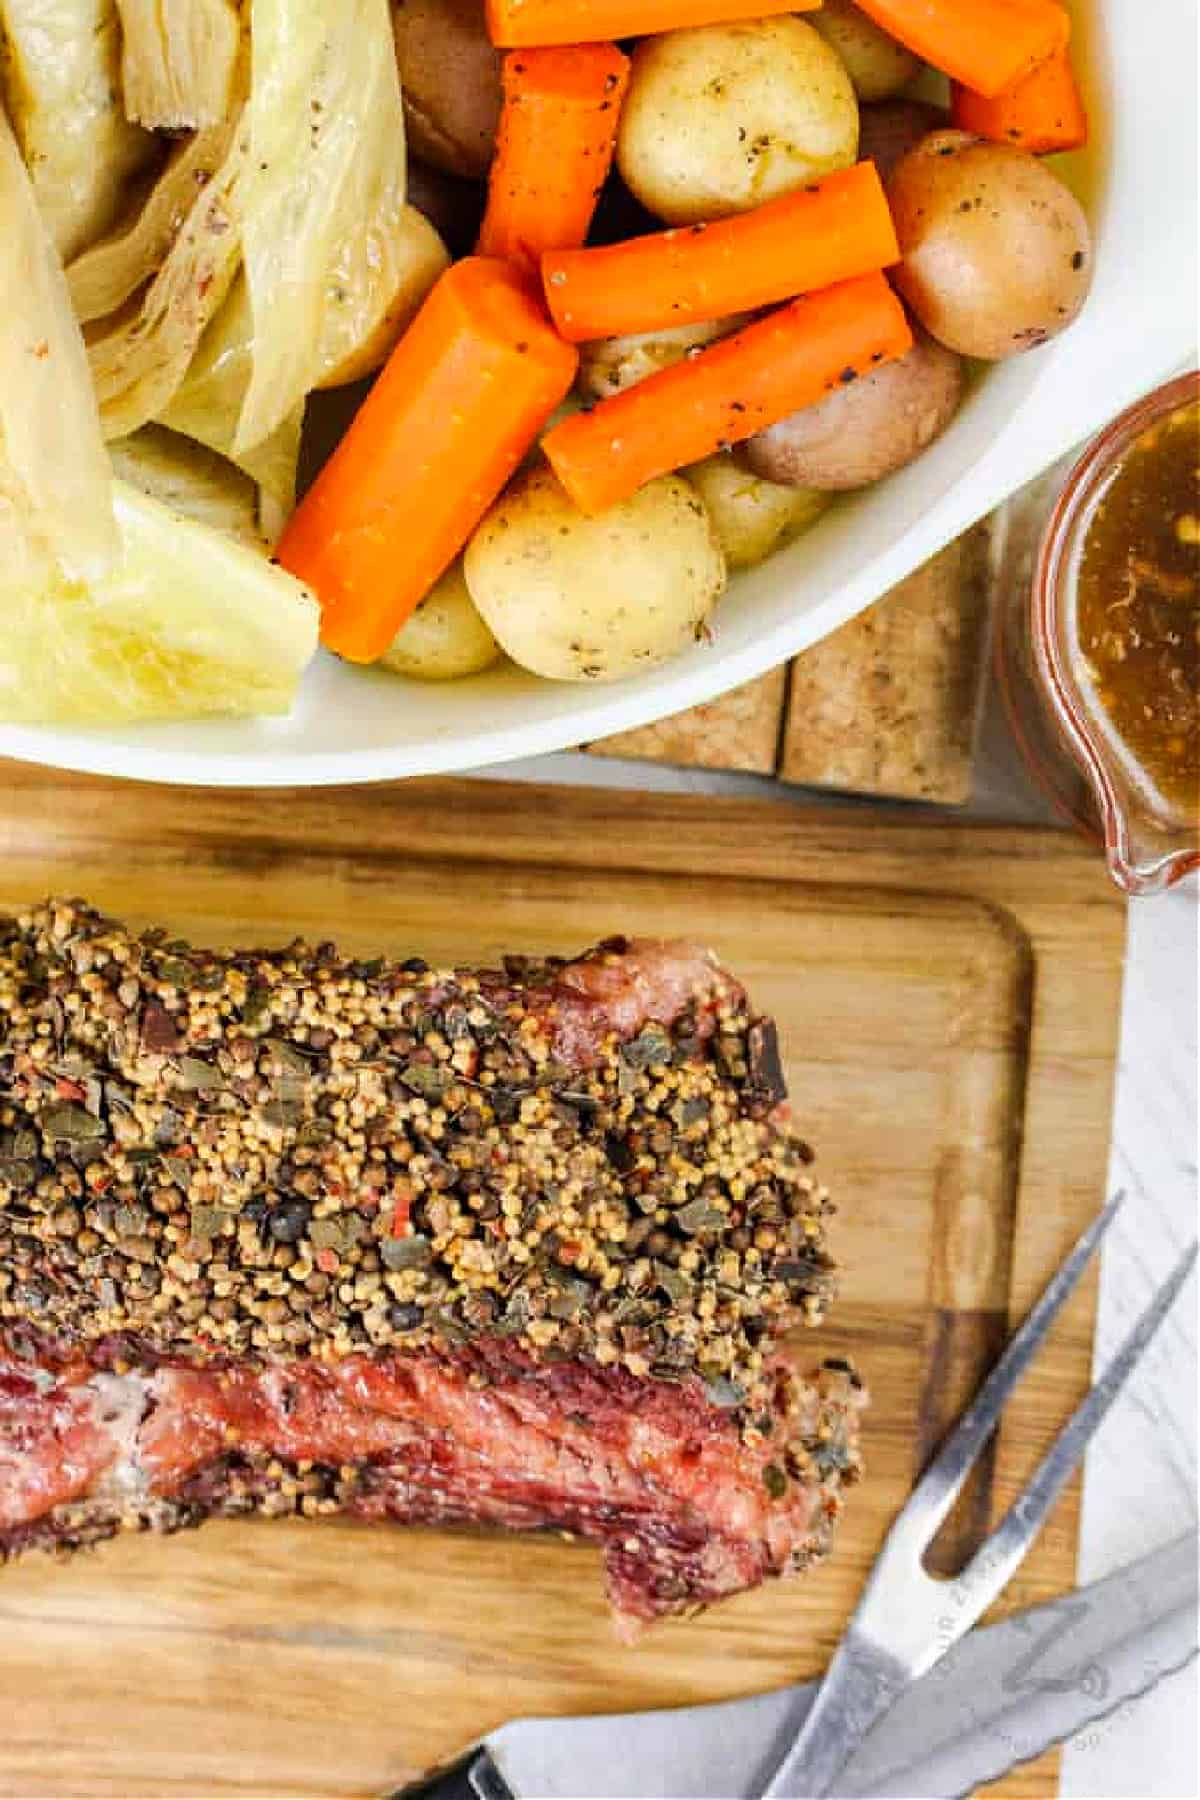 top view of Instant Pot corned beef and cabbage on a wooden platter, with carving utensils on the side, with a side of cabbage, potatoes, carrots and gravy